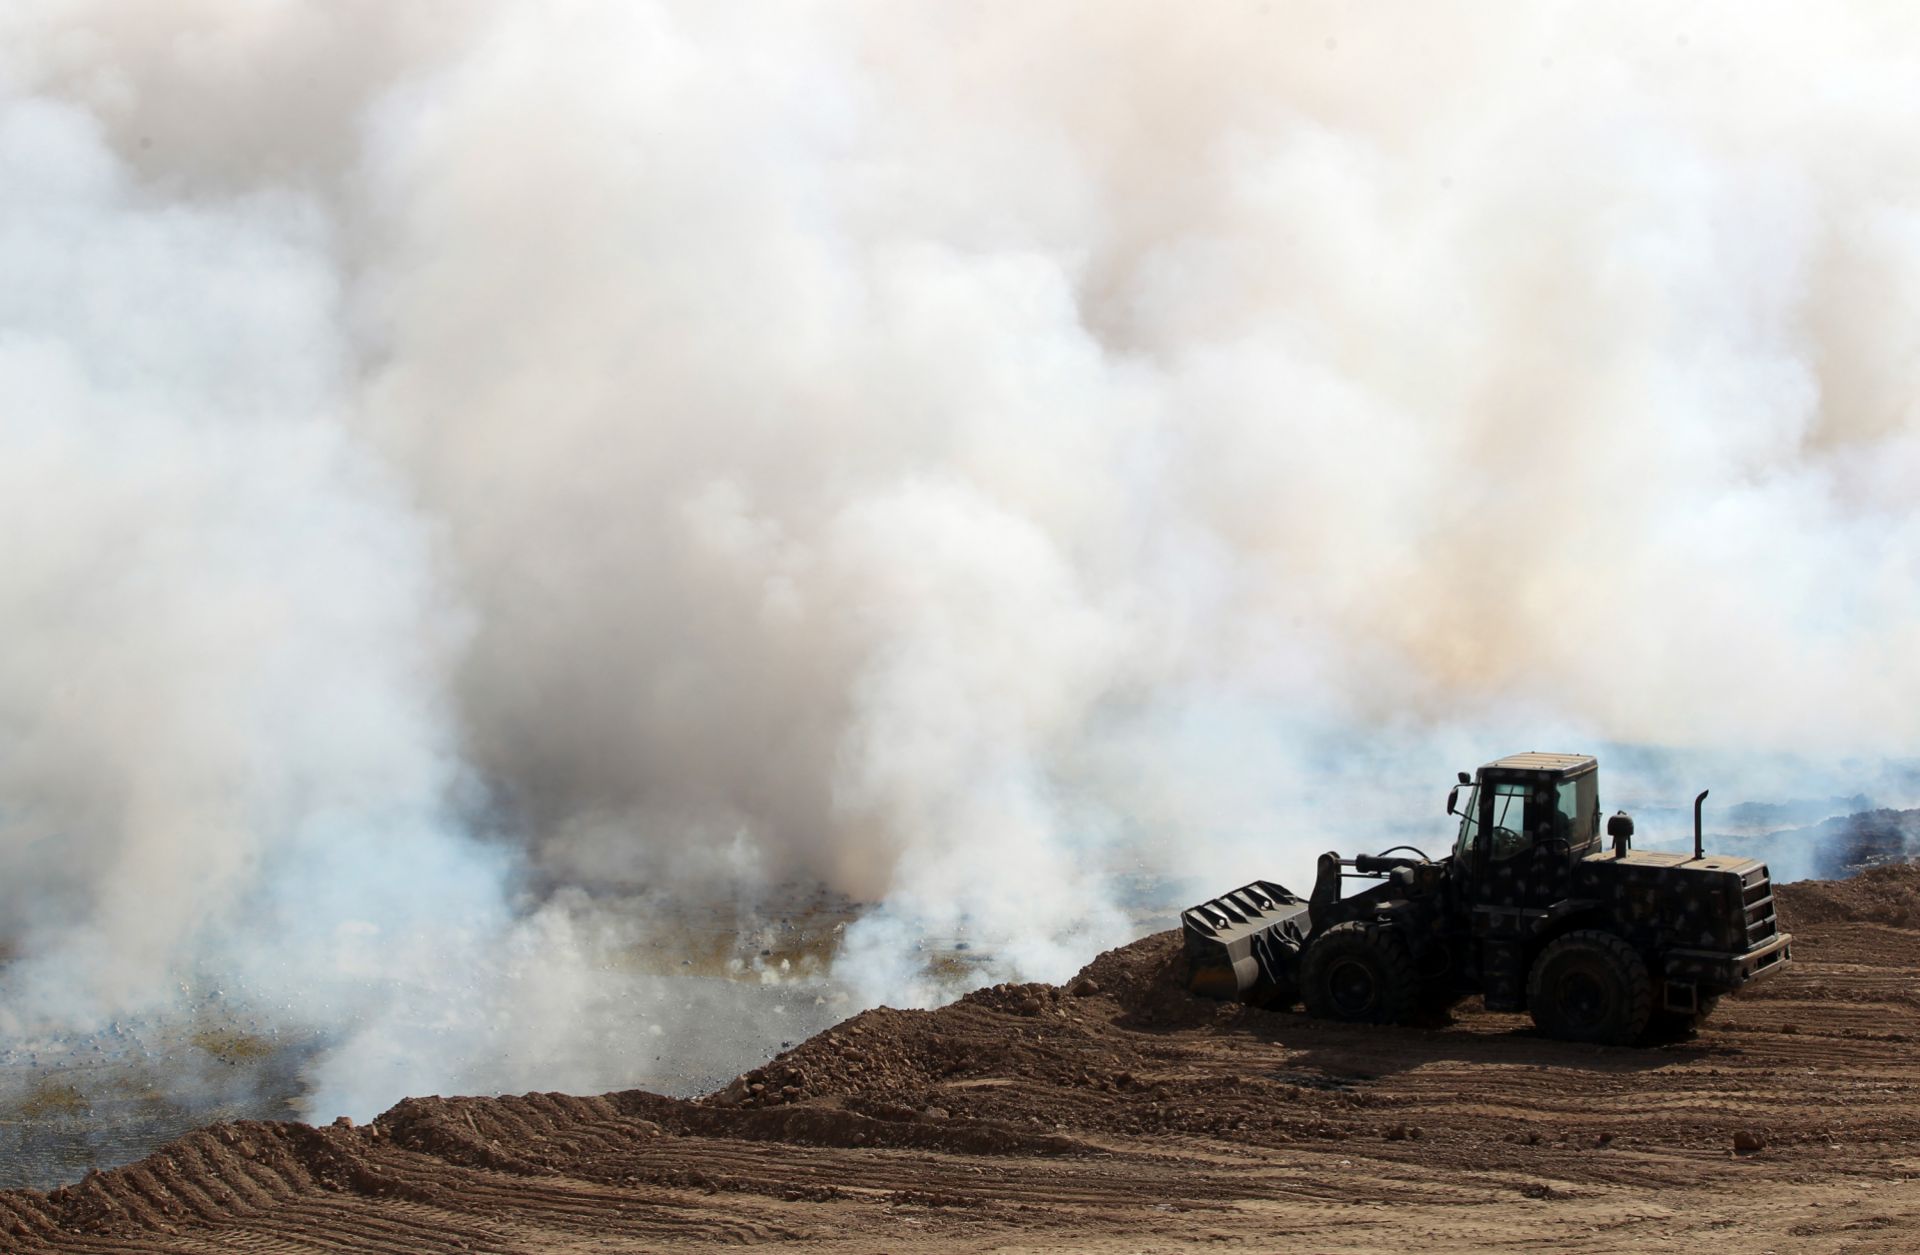 Iraqi forces attempt to extinguish a blaze set by the Islamic State in October 2016 south of Mosul.